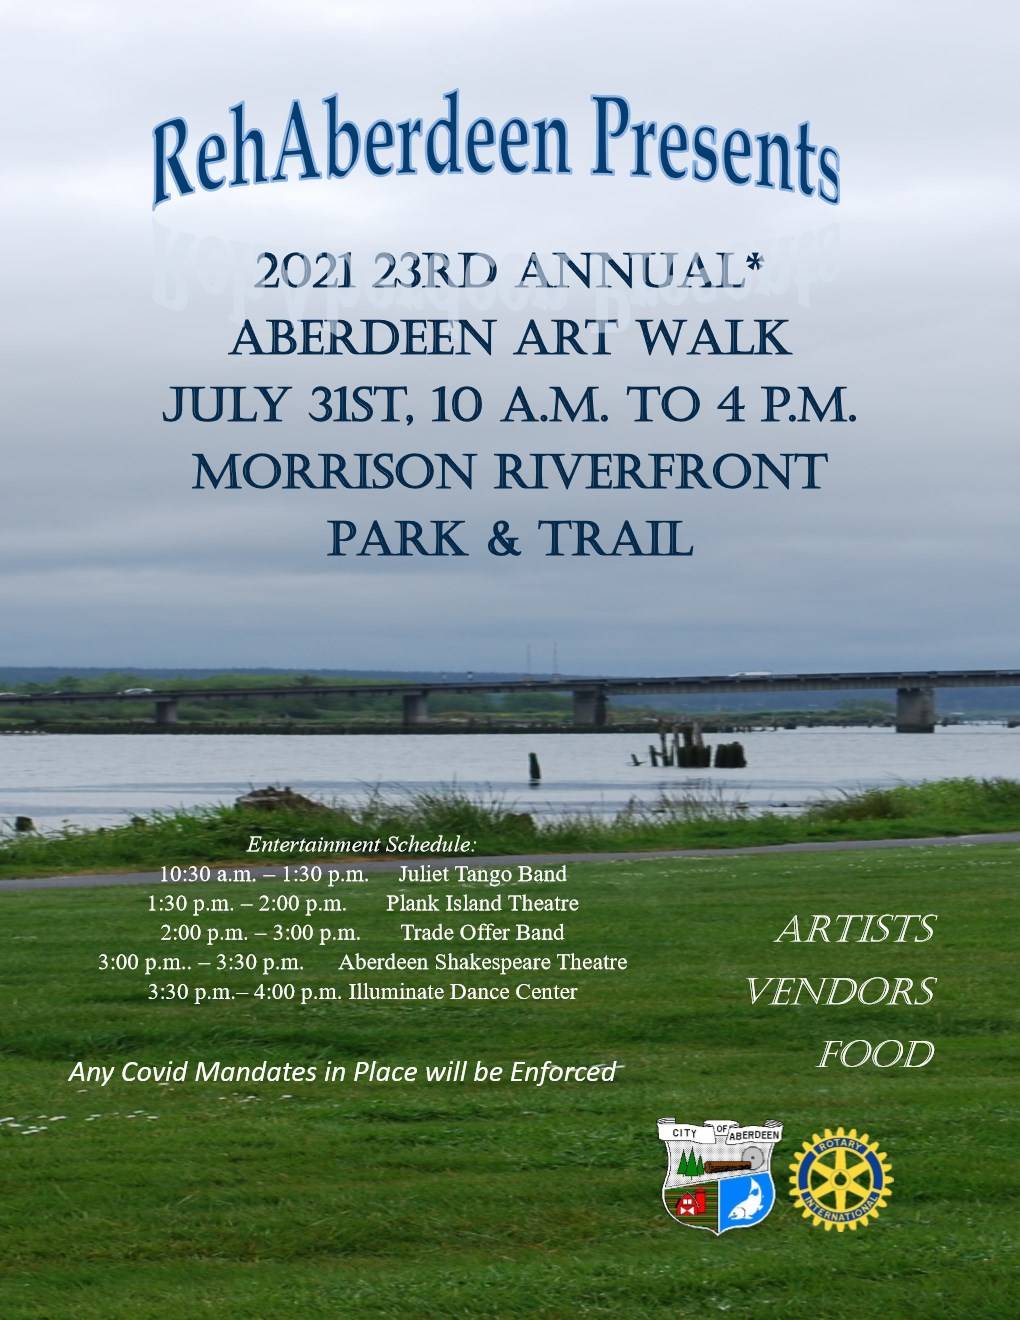 ReHABerdeen EVENT FLYER
The 23rd Annual Aberdeen Art Walk is Saturday, July 31, at Morrison Riverfront Park